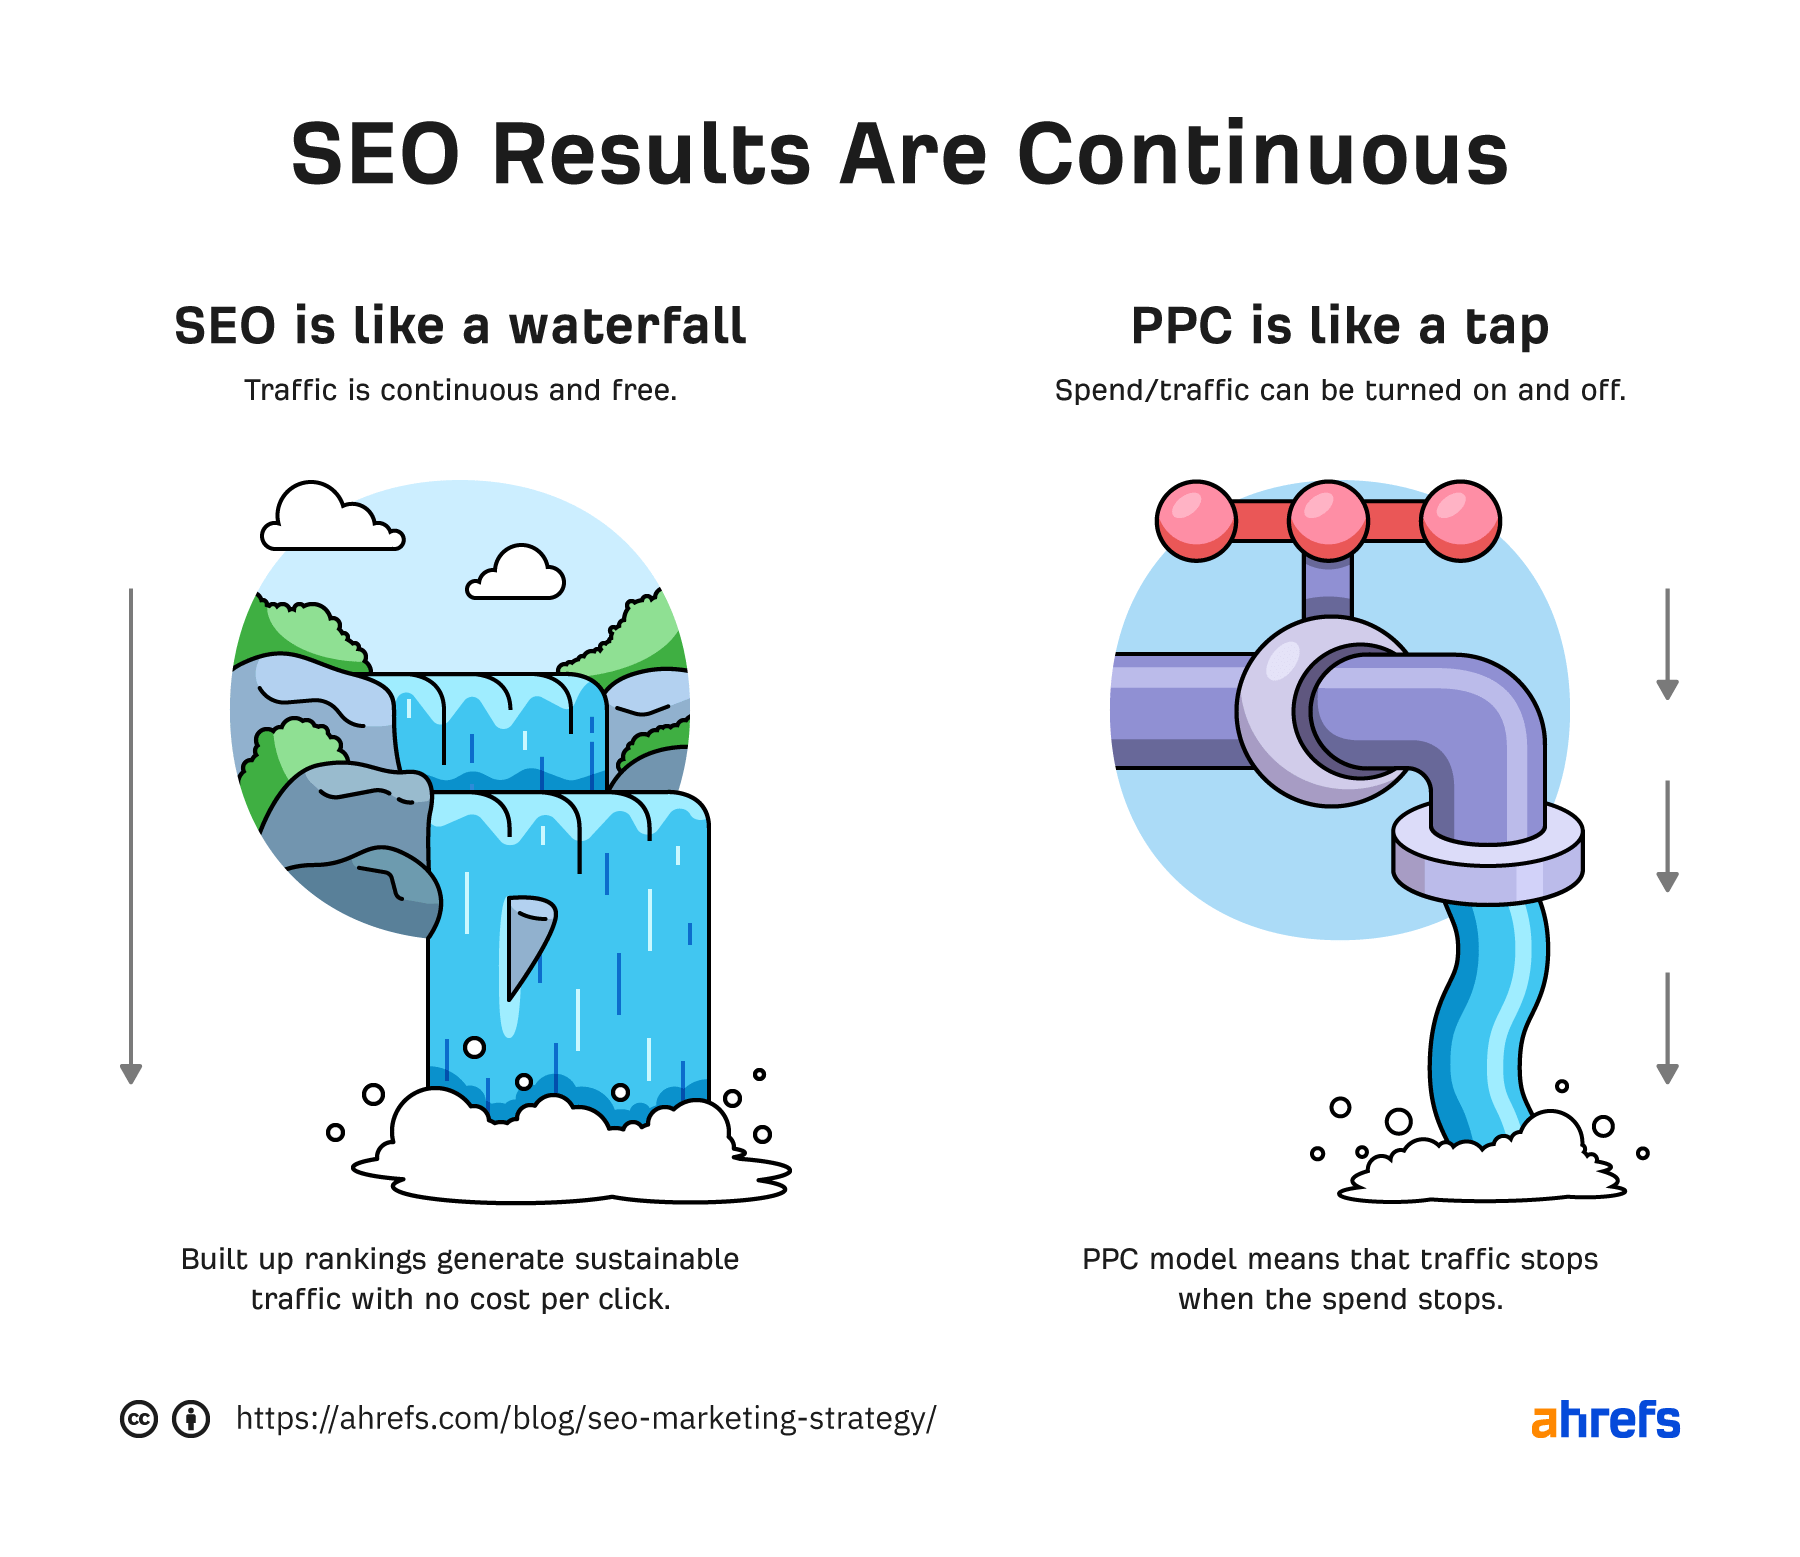 Organic traffic is continuous like a waterfall; traffic acquired via PPC can be turned on and off like a water tap